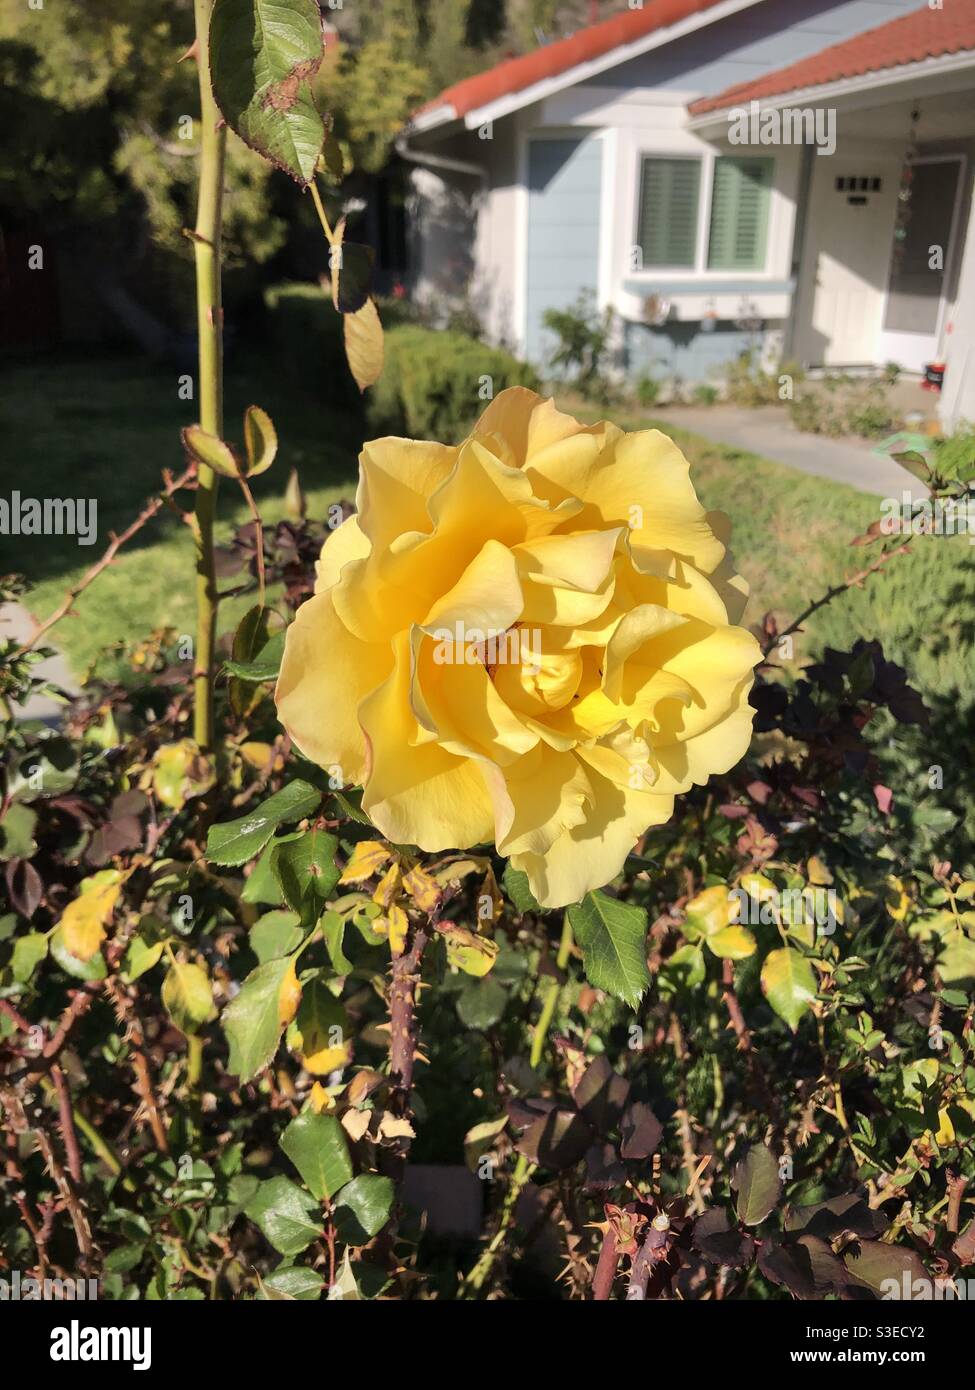 Large yellow rose in bloom Stock Photo